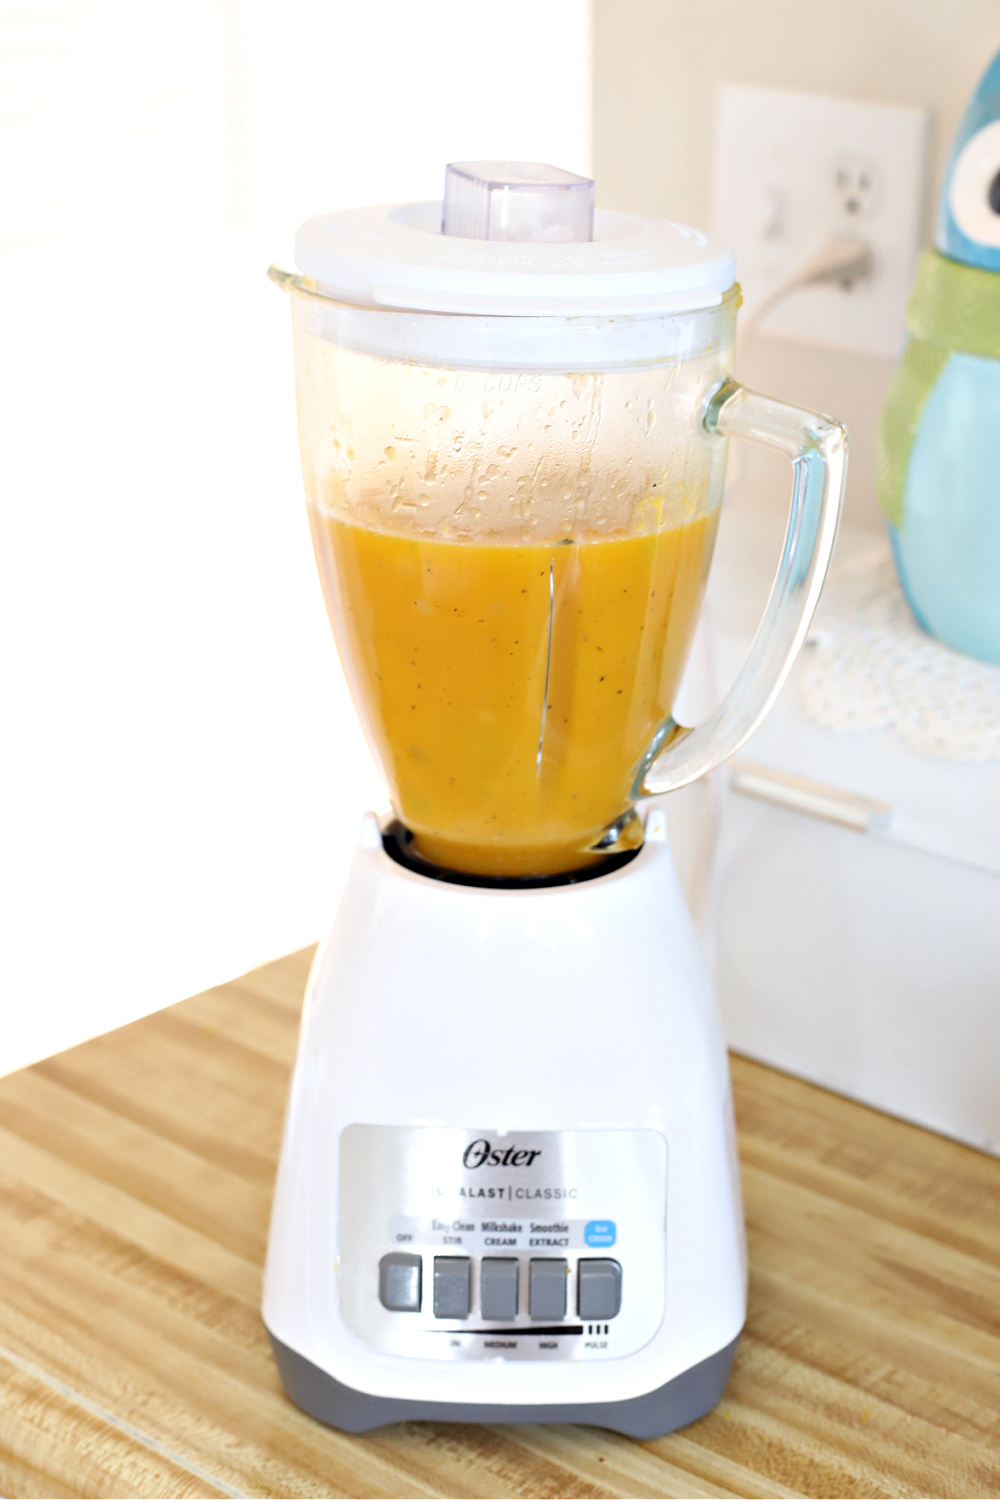 Using a blender to puree the butternut squash soup